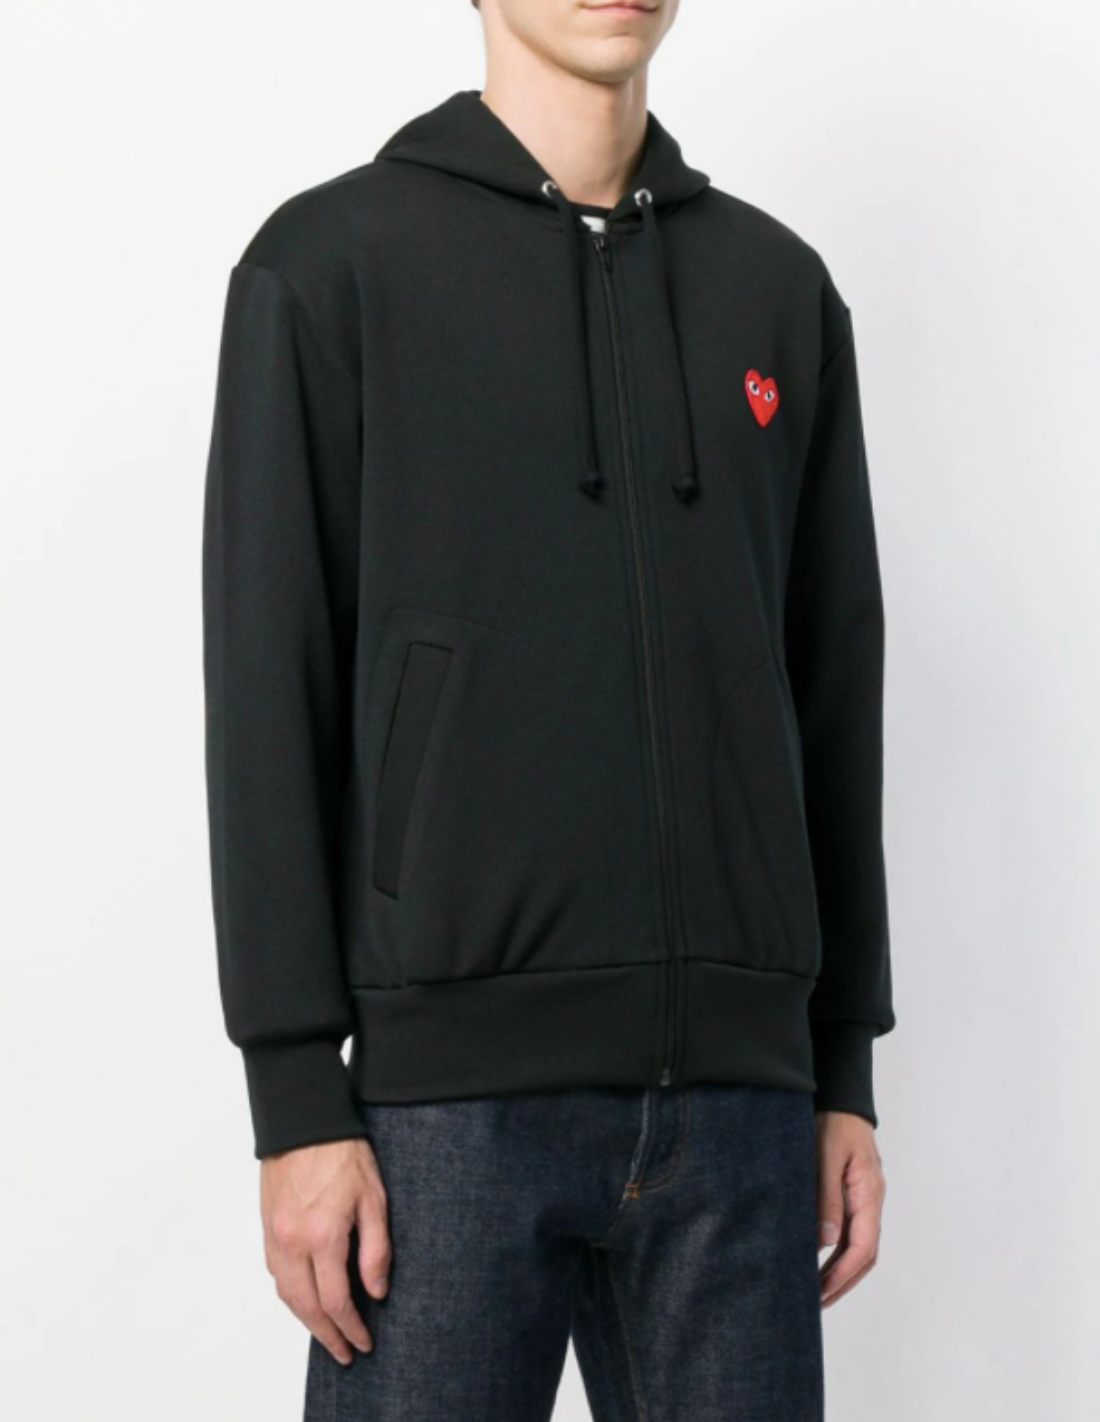 COMME DES GARCONS zip-up black hoddy with red heart patch unisex